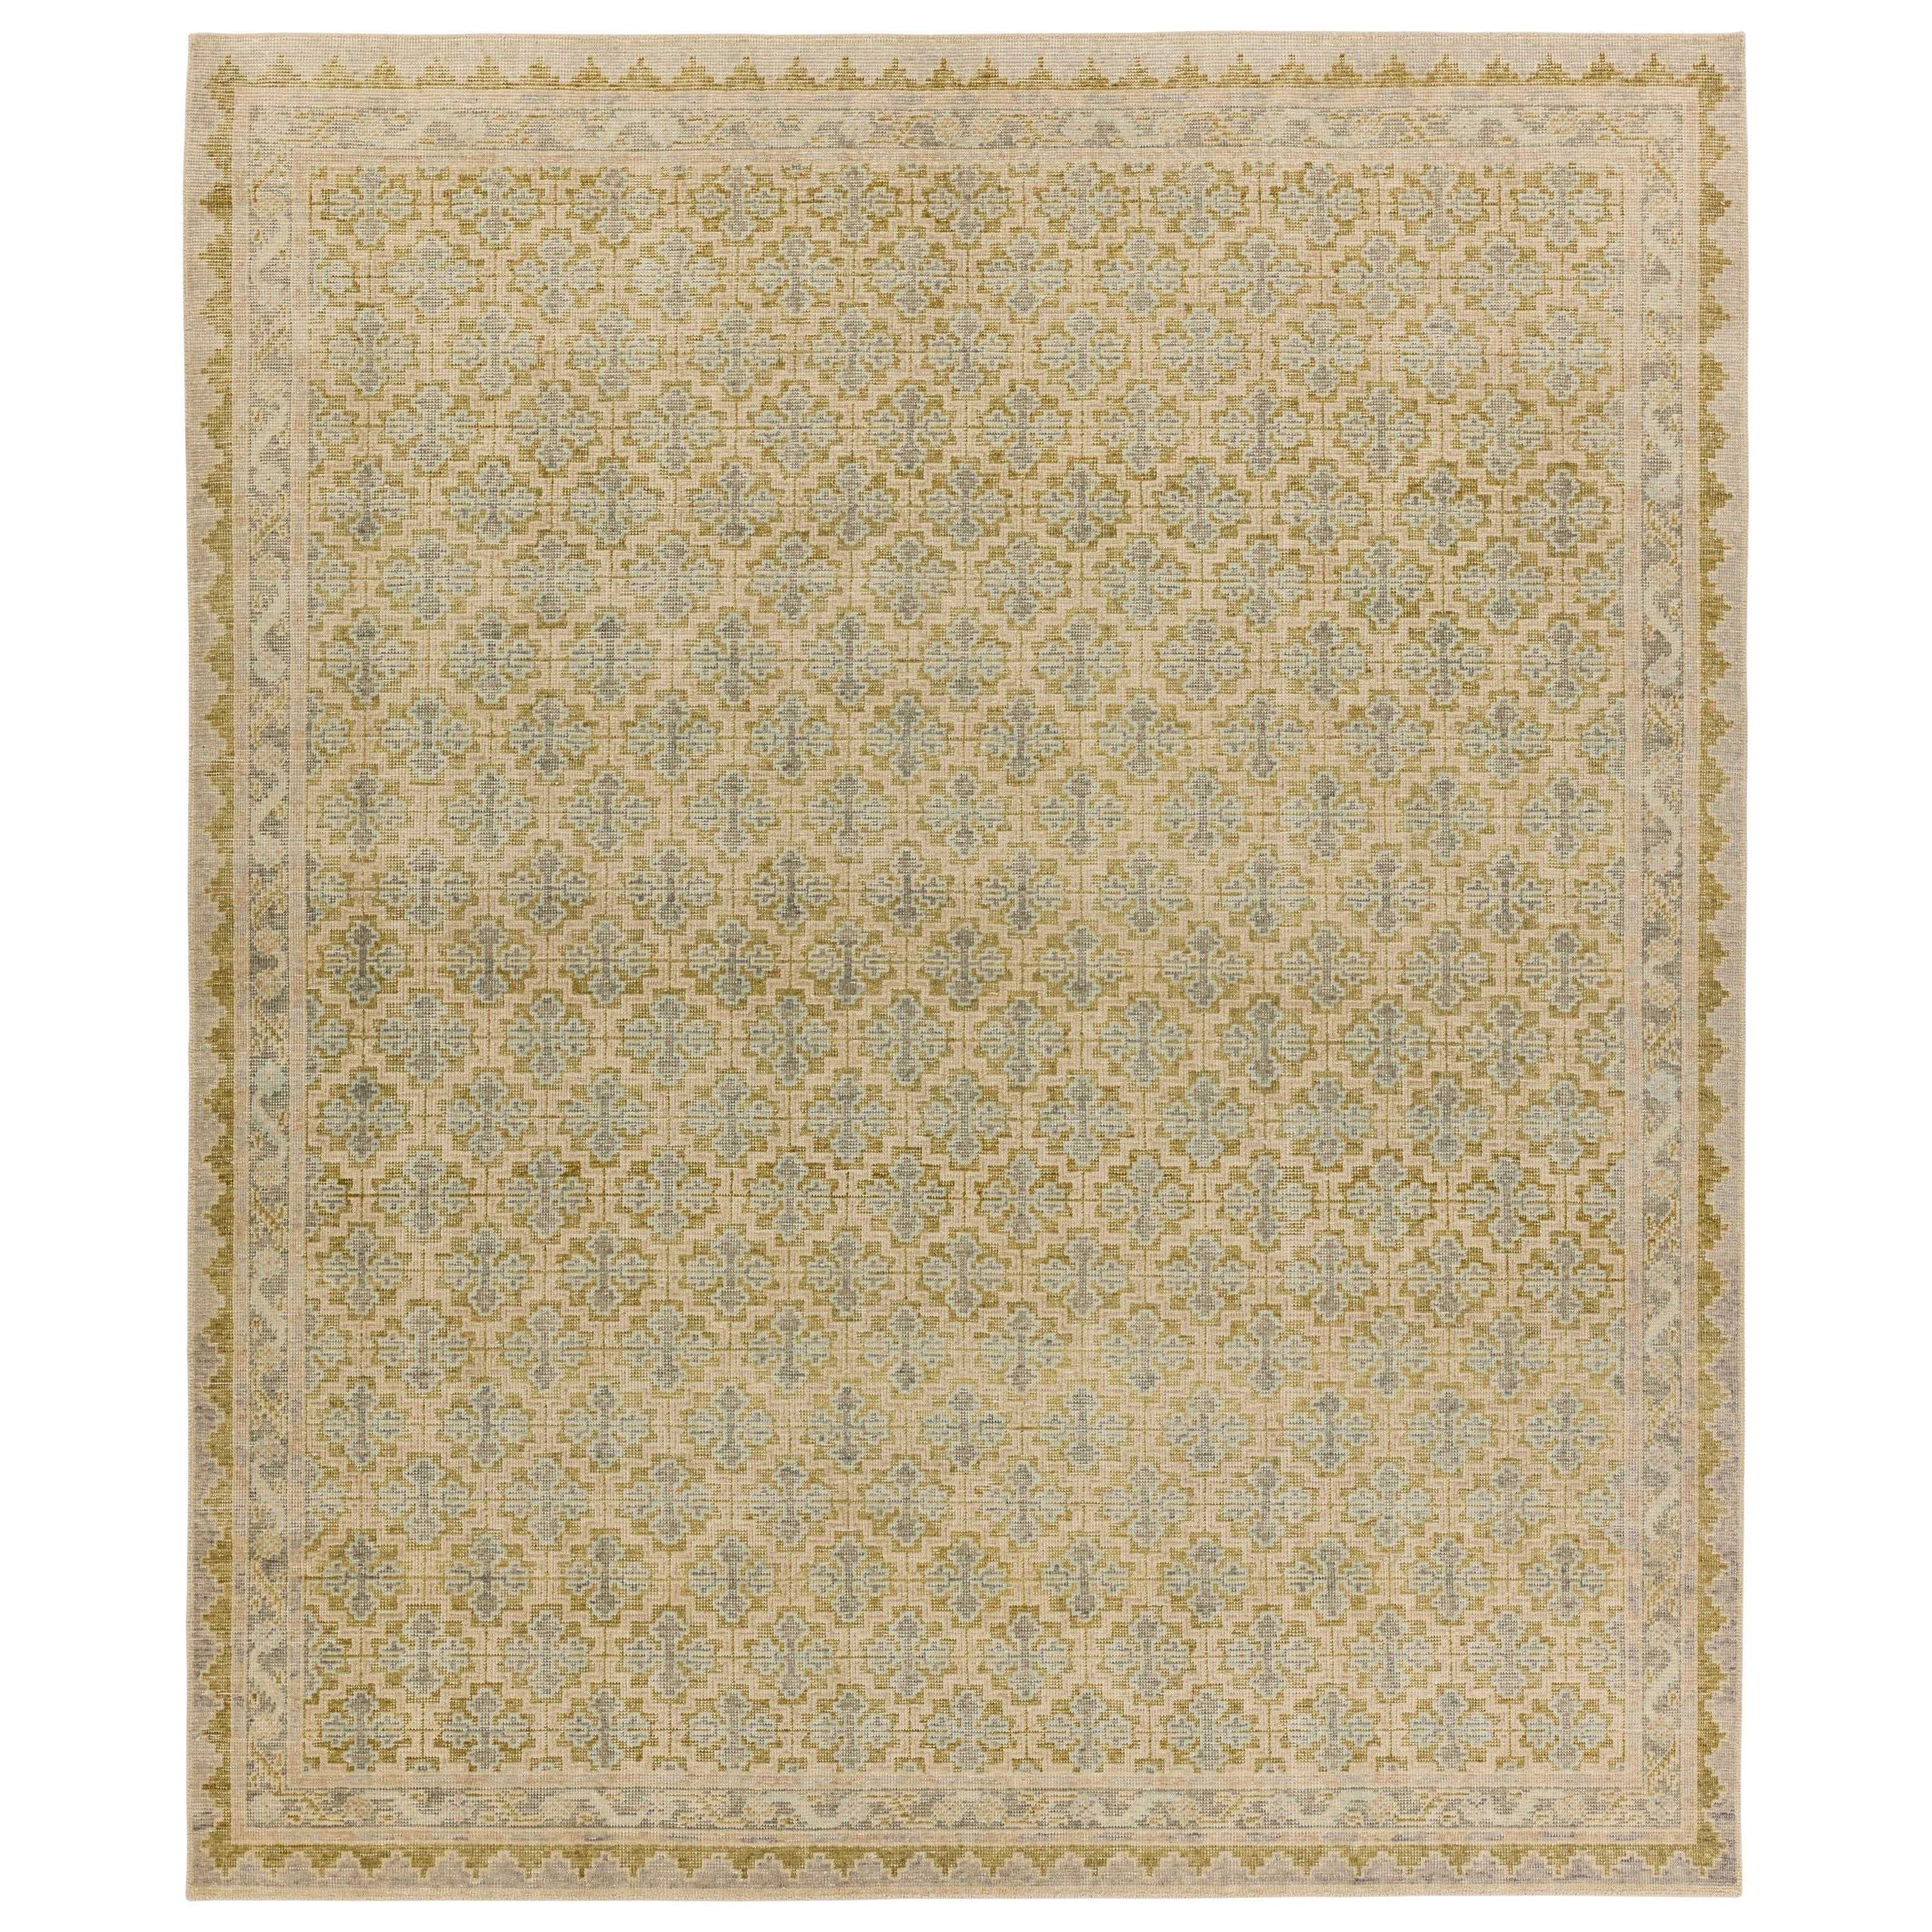 The Onessa collection marries traditional motifs with soft, subdued colorways for the perfect blend of fresh and time-honored style. These hand-knotted wool rugs feature a hand-sheared quality that lends the design a coveted vintage impression. The Mildred rug features a tile and mini-medallion pattern in hues of blue, green, cream, taupe, and gray. Amethyst Home provides interior design, new construction, custom furniture, and area rugs in the Laguna Beach metro area.